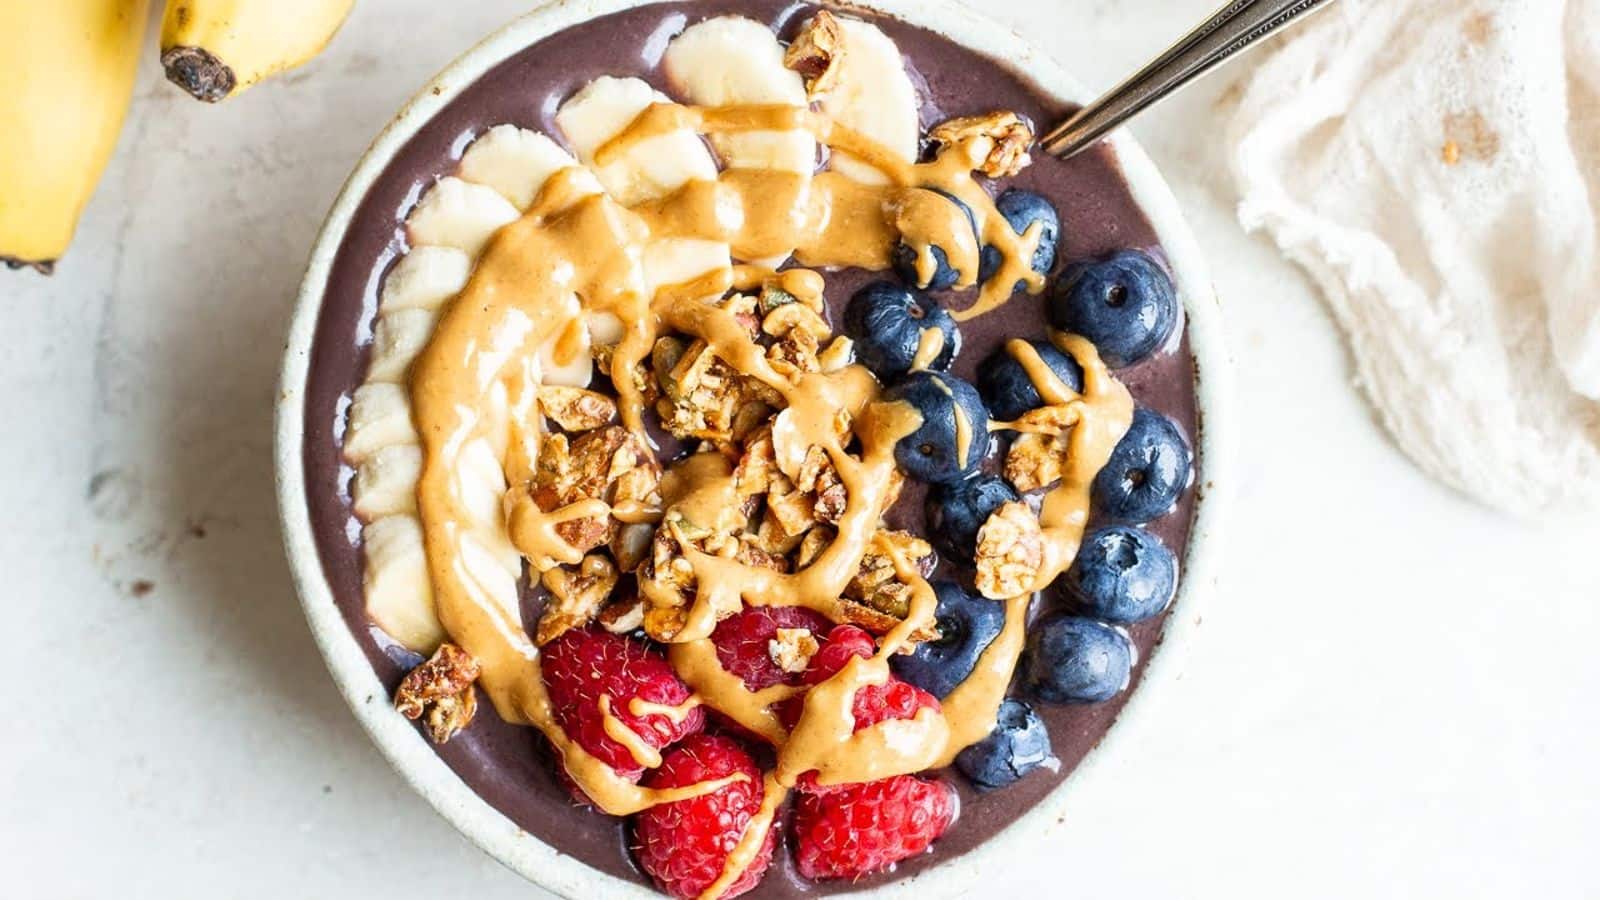 Prepare the acai berry bowl in 3 simple steps